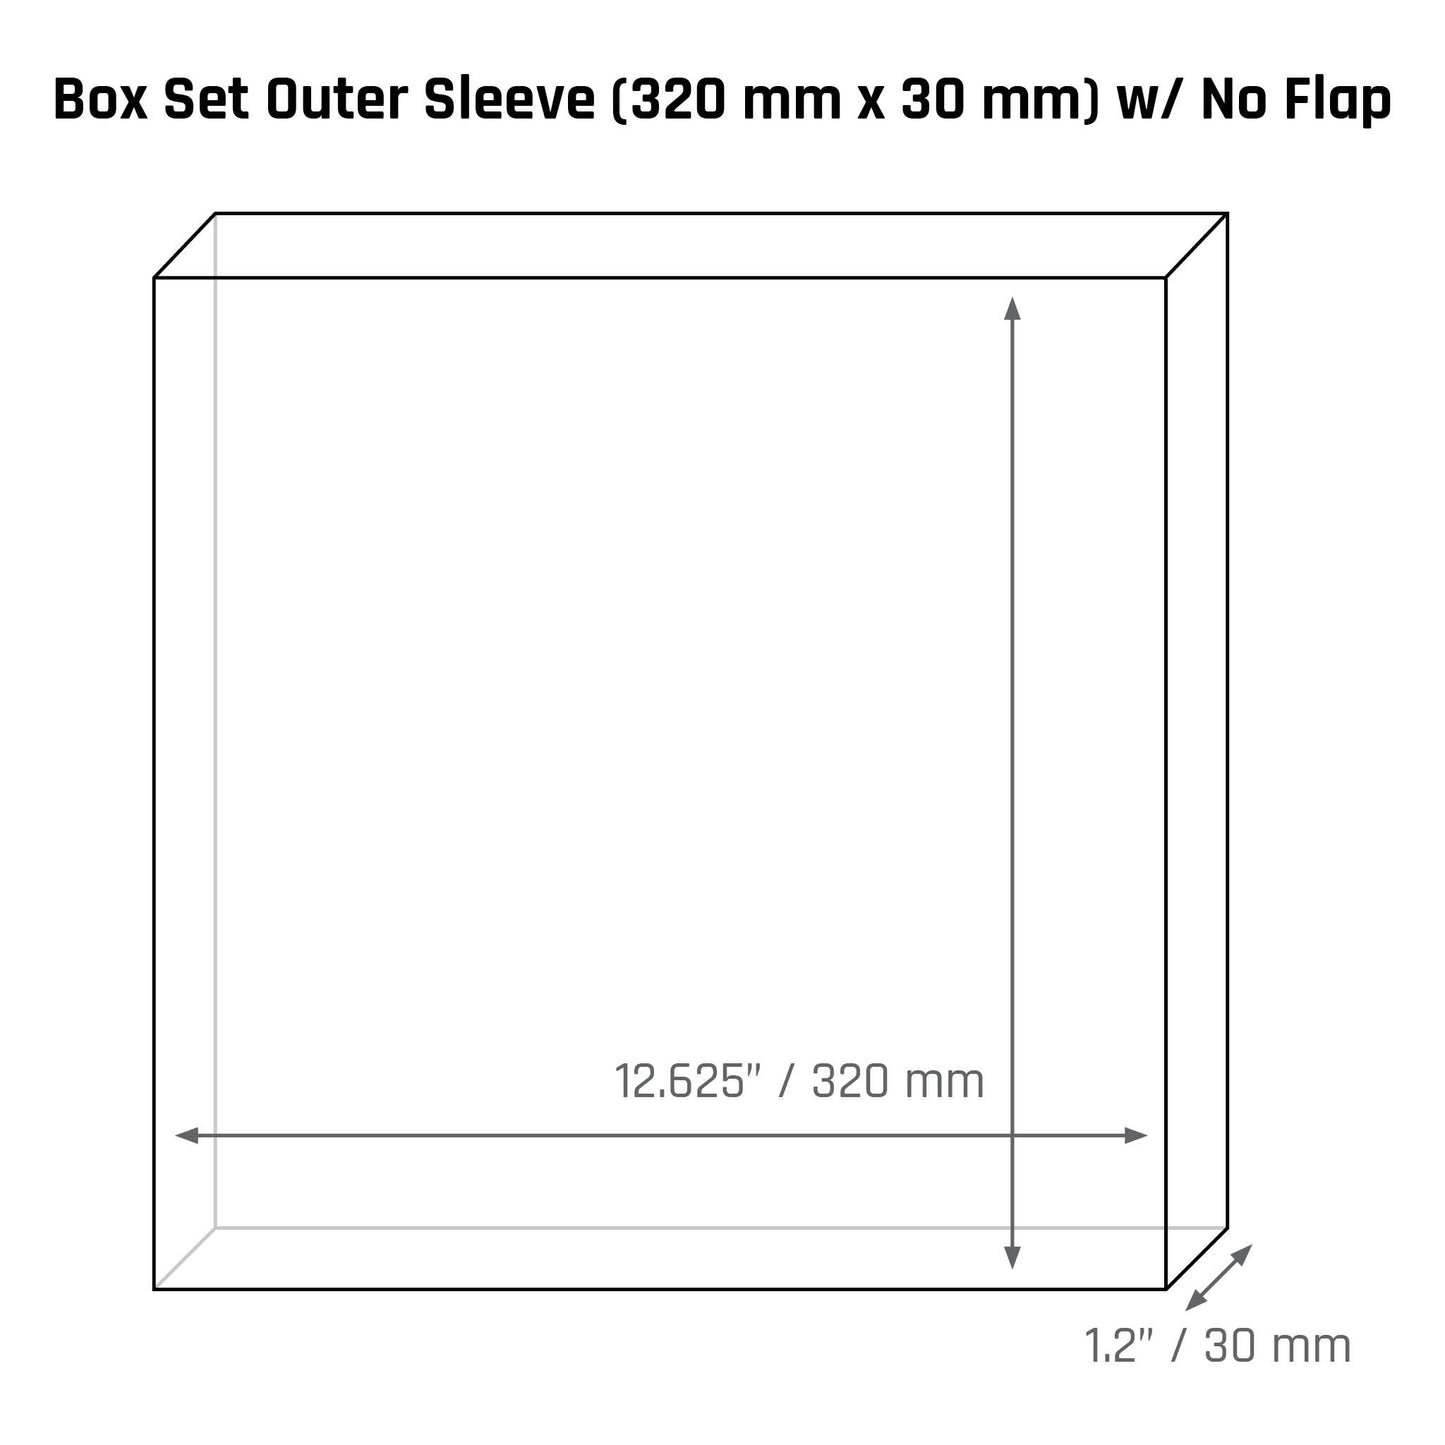 Box Set Outer Sleeve (320 mm x 30 mm) - 3mil - Vinyl Storage Solutions